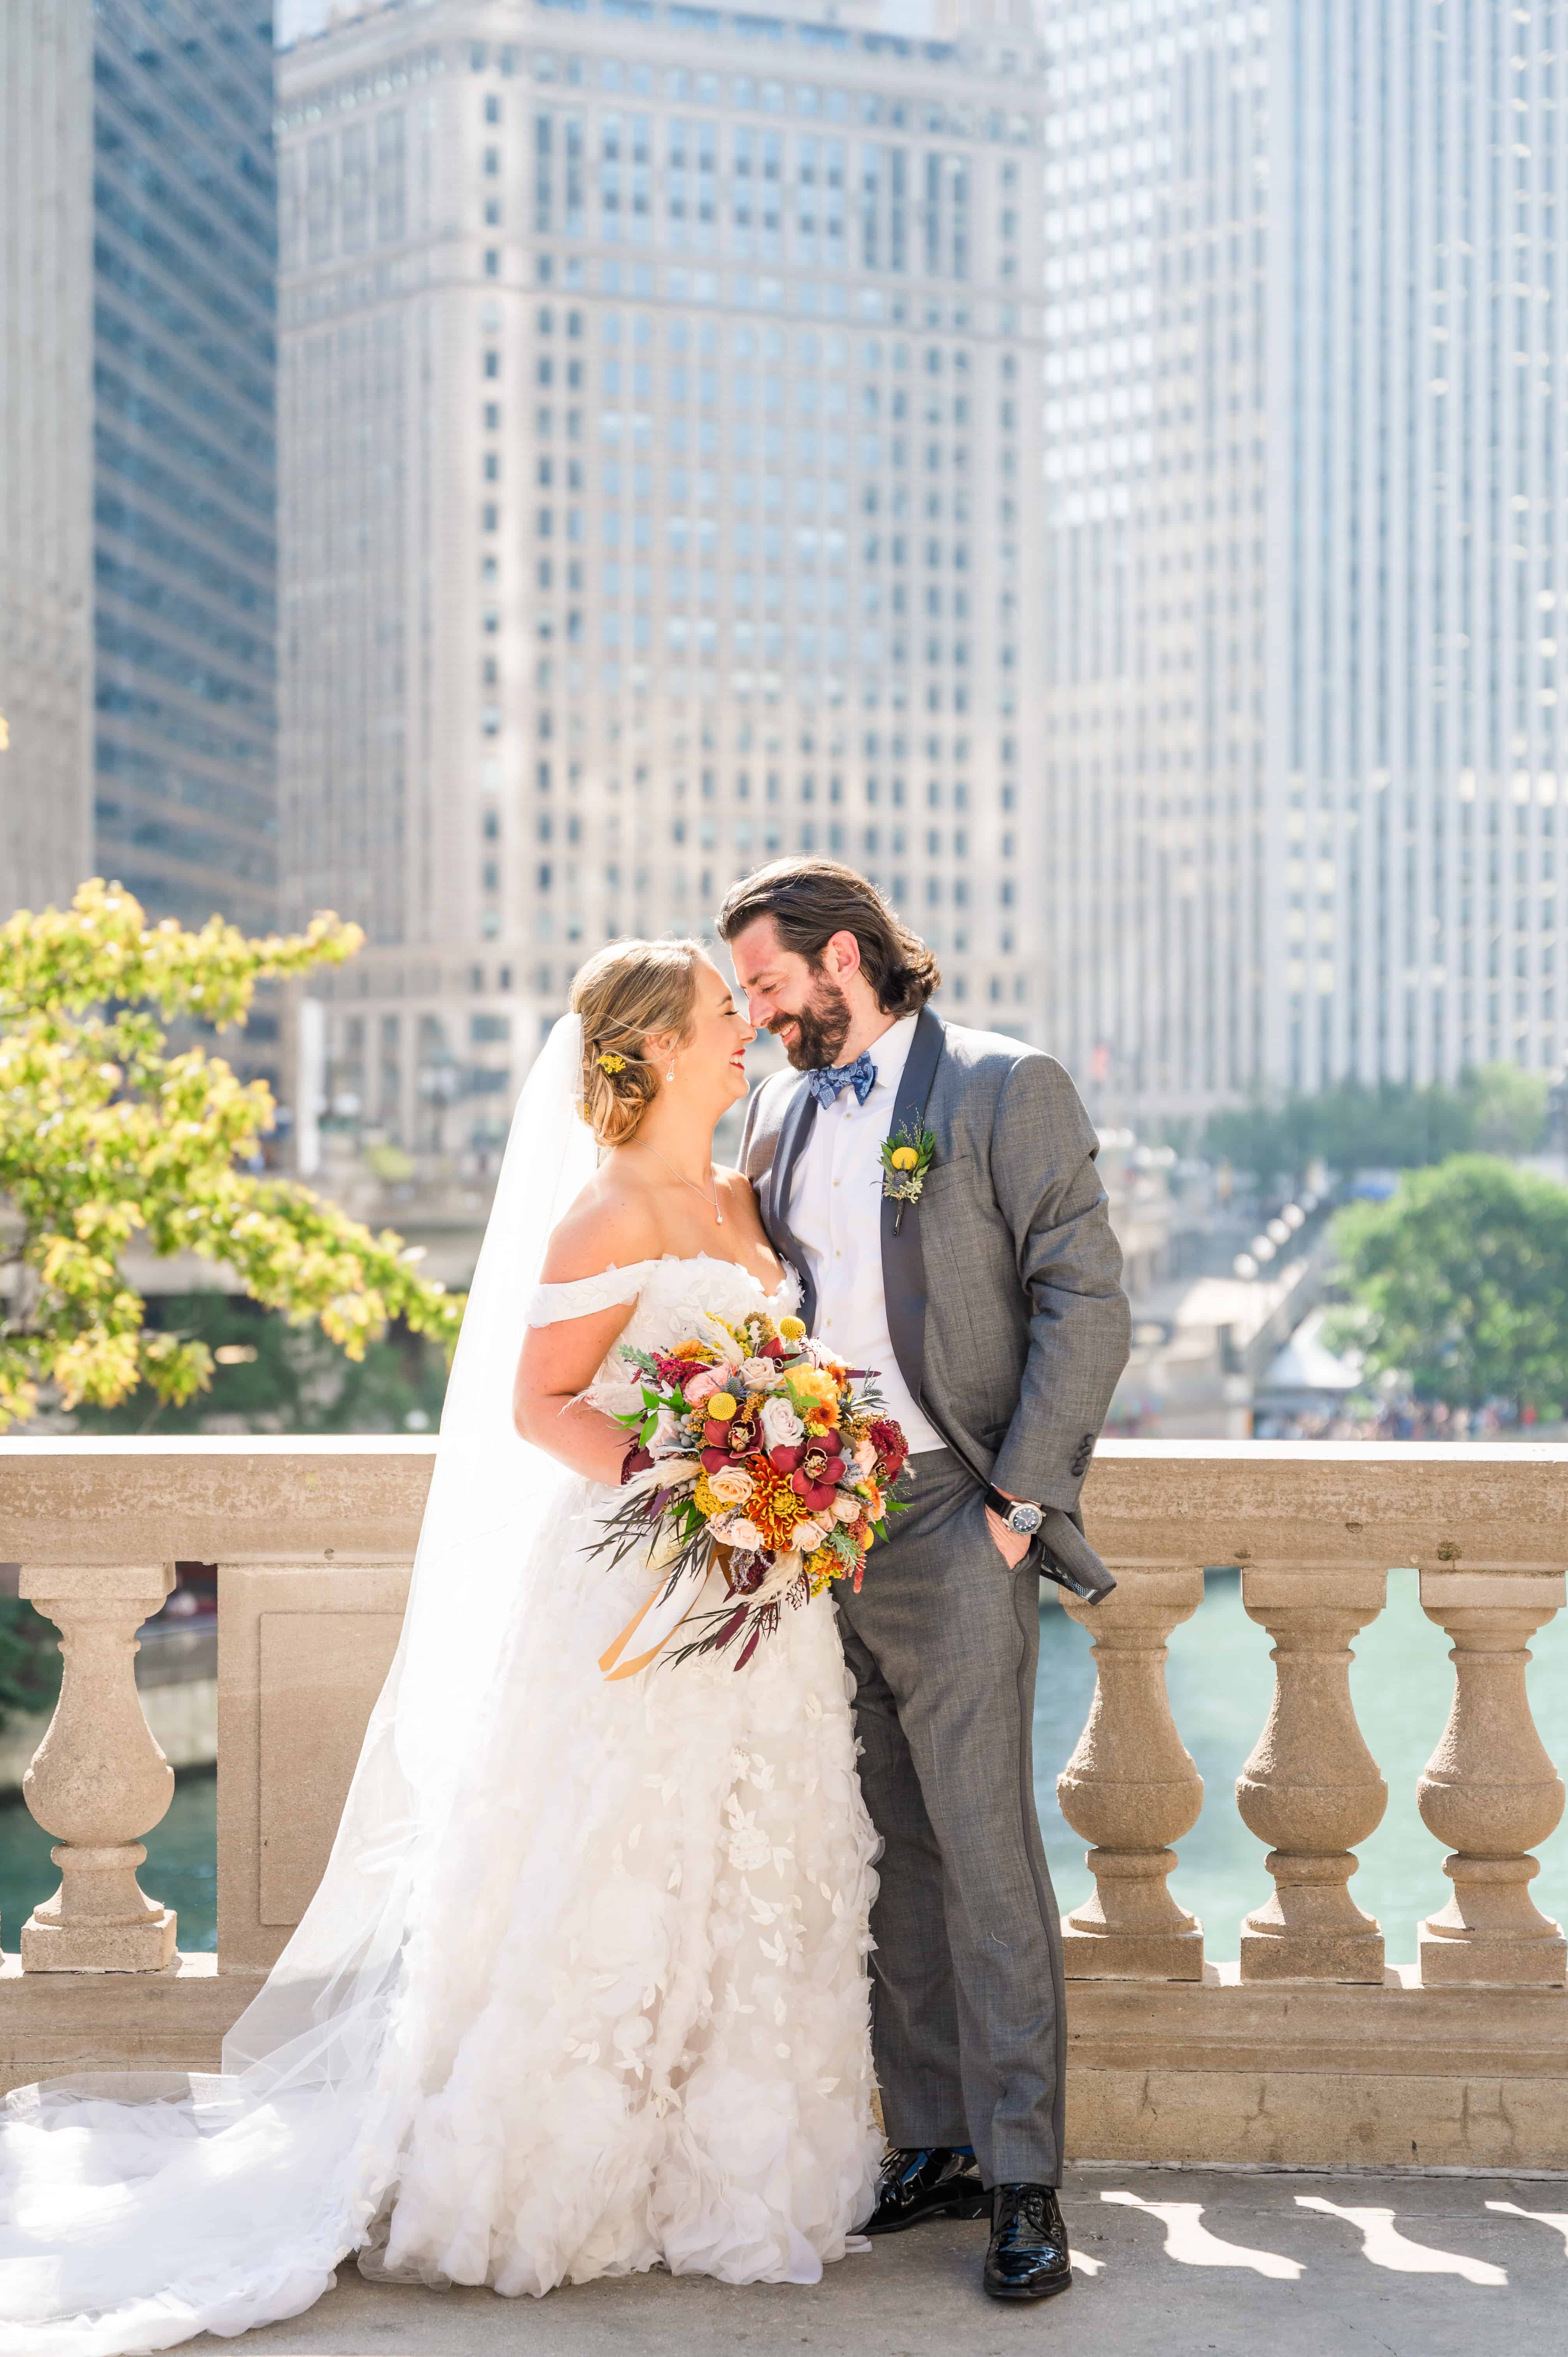 Downtown Chicago wedding portrait at Wrigley Building.